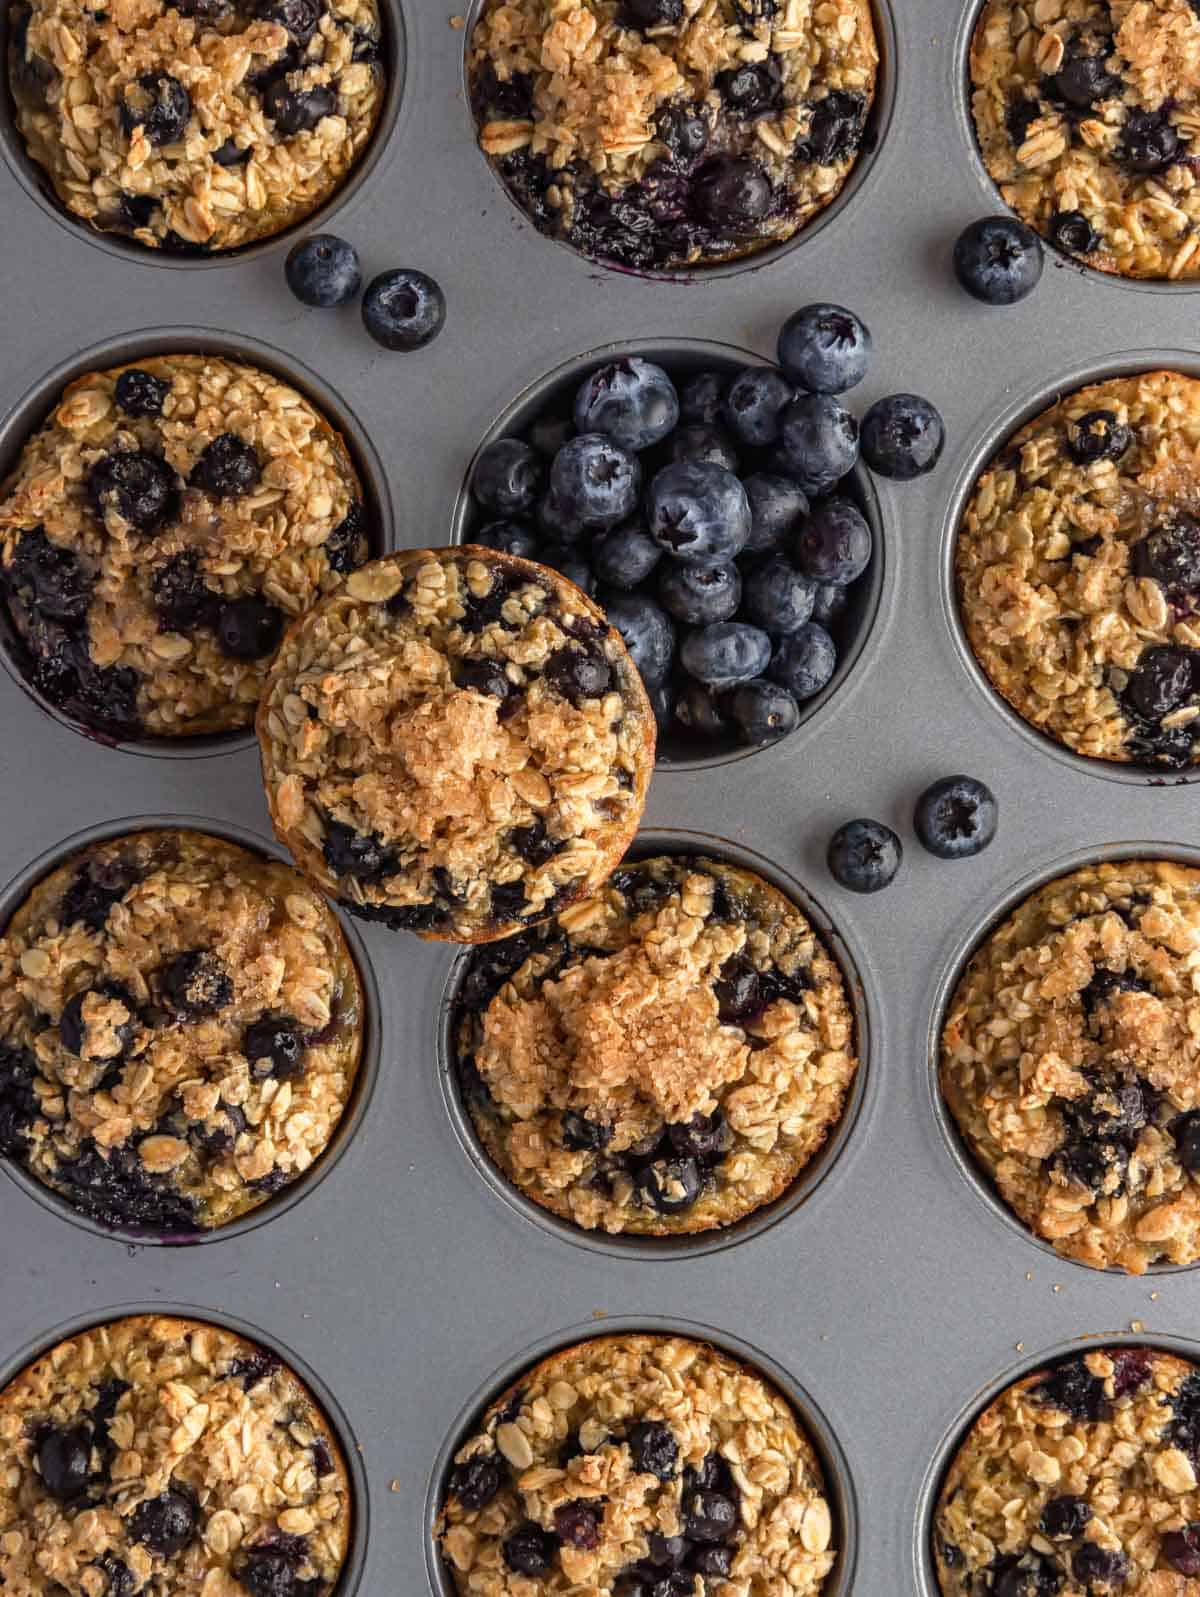 Cooked blueberry oatmeal cups on a tray with blueberries.